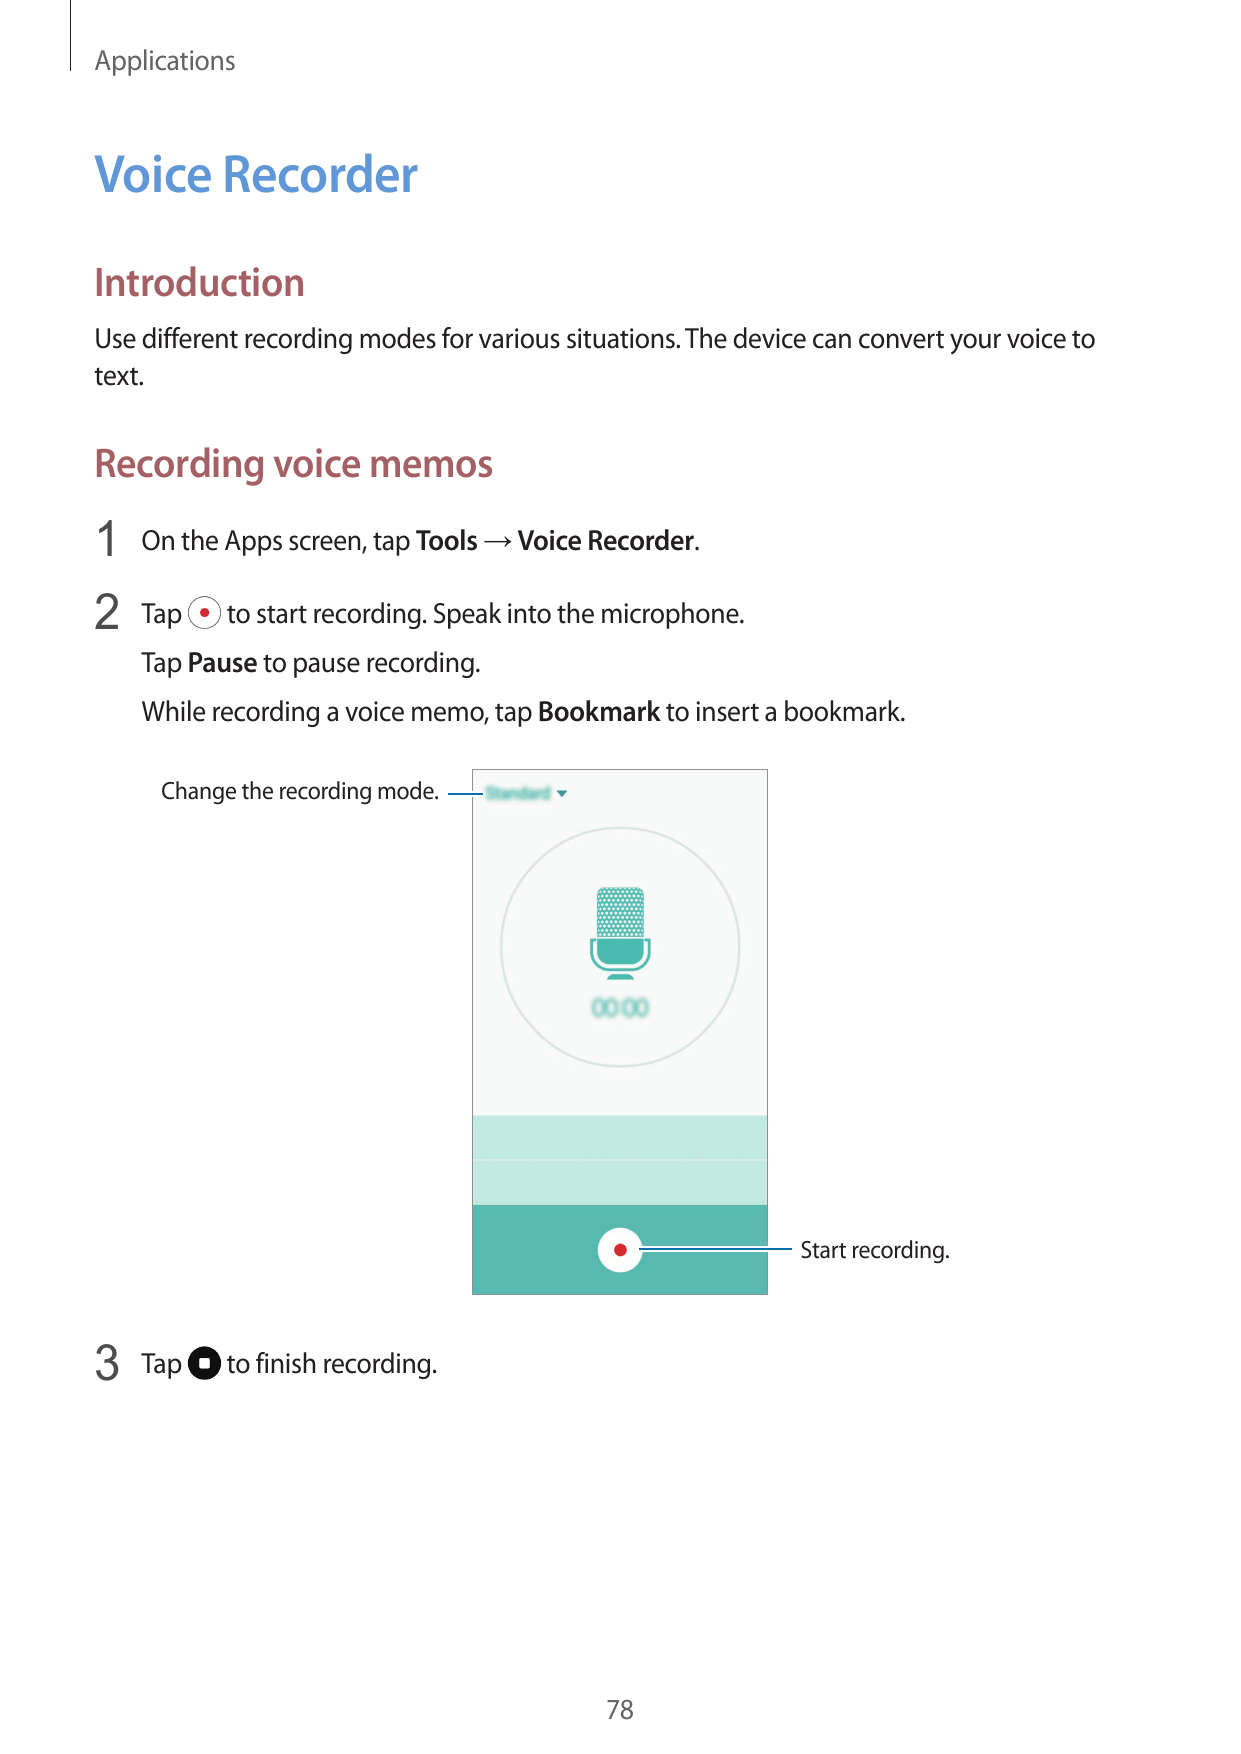 ApplicationsVoice RecorderIntroductionUse different recording modes for various situations. The device can convert your voice to